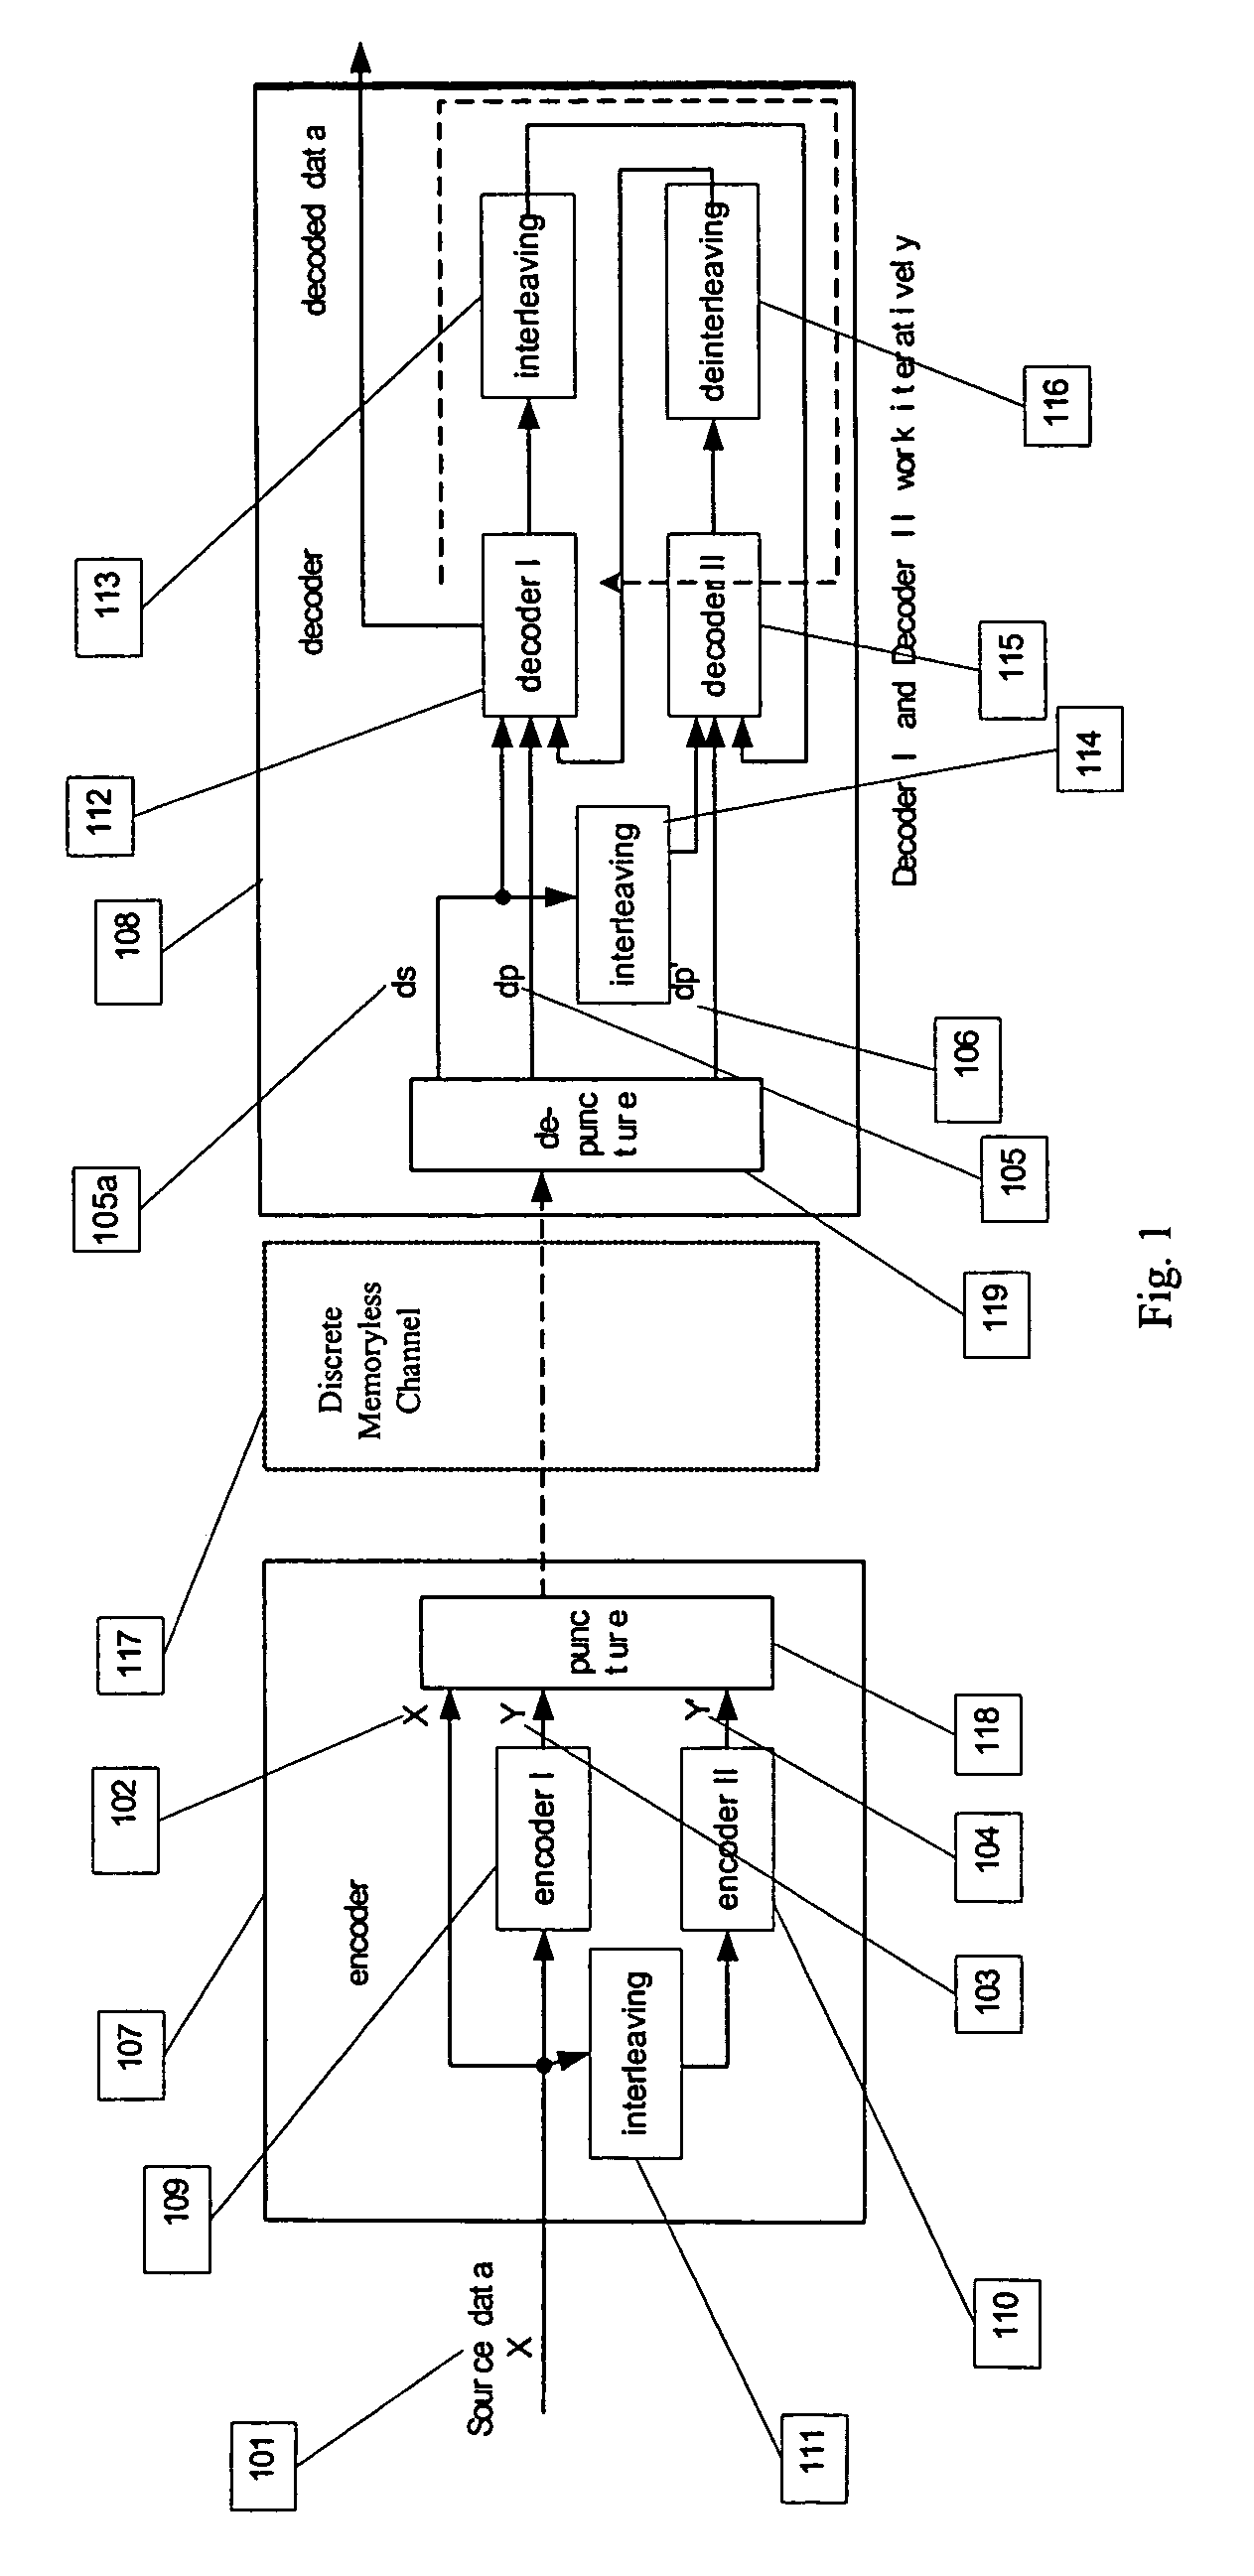 Embedded state metric storage for MAP decoder of turbo codes